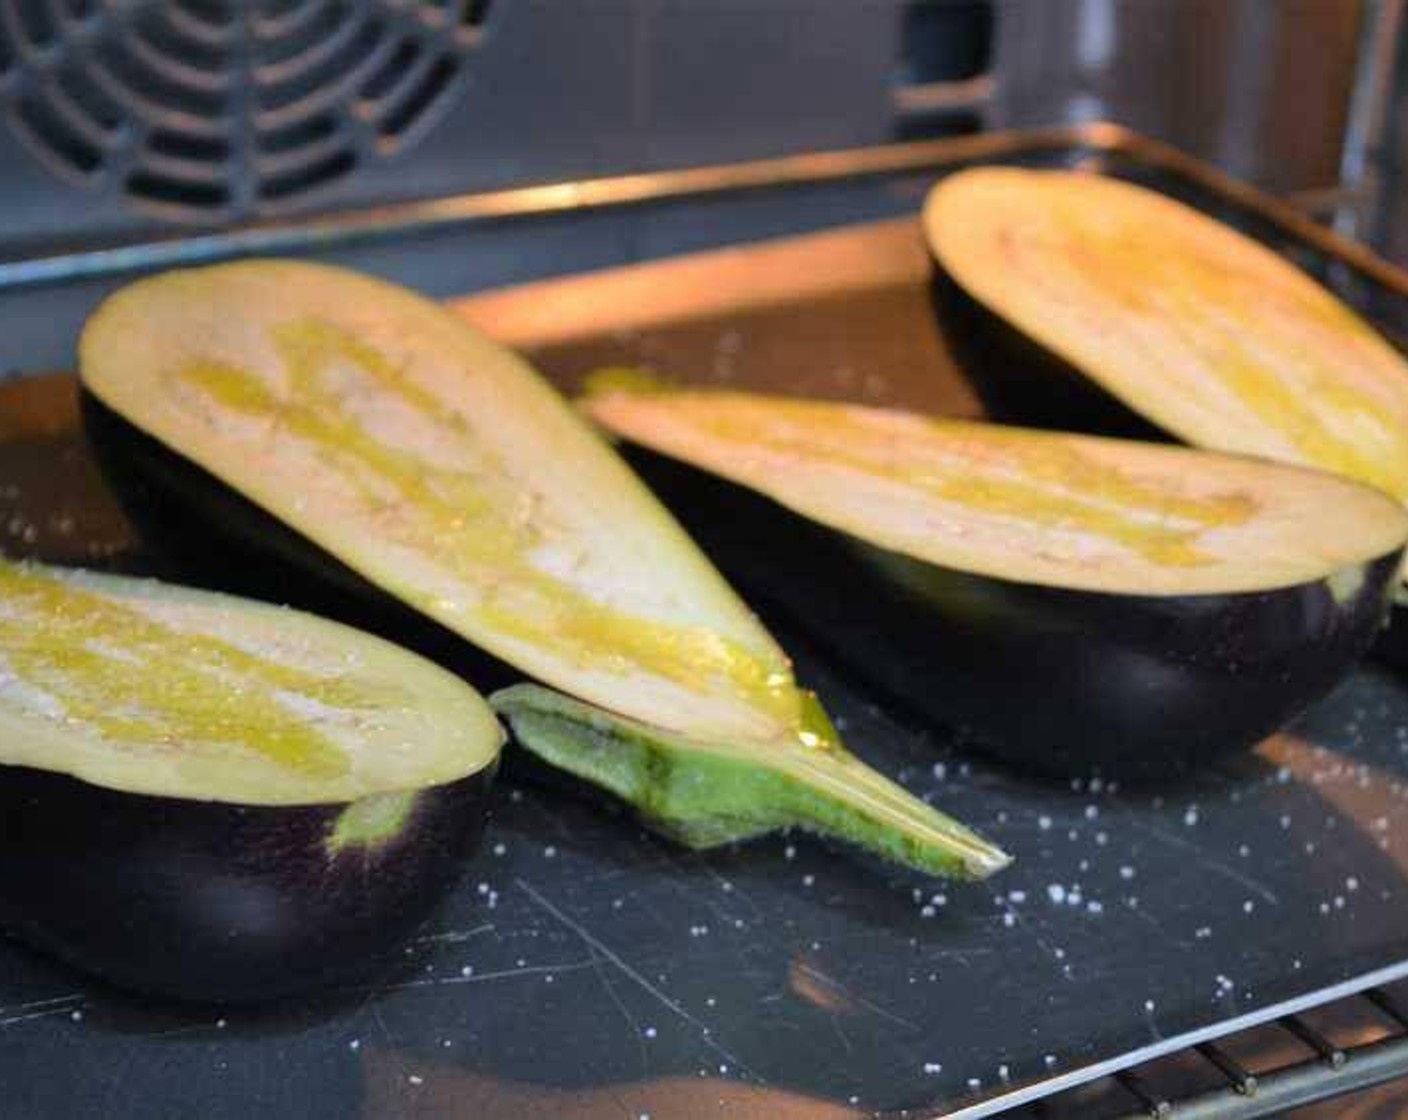 step 4 Place the eggplants in the preheated oven for 10 to 15 minutes. Monitor them every few minutes until they are well cooked in the center.